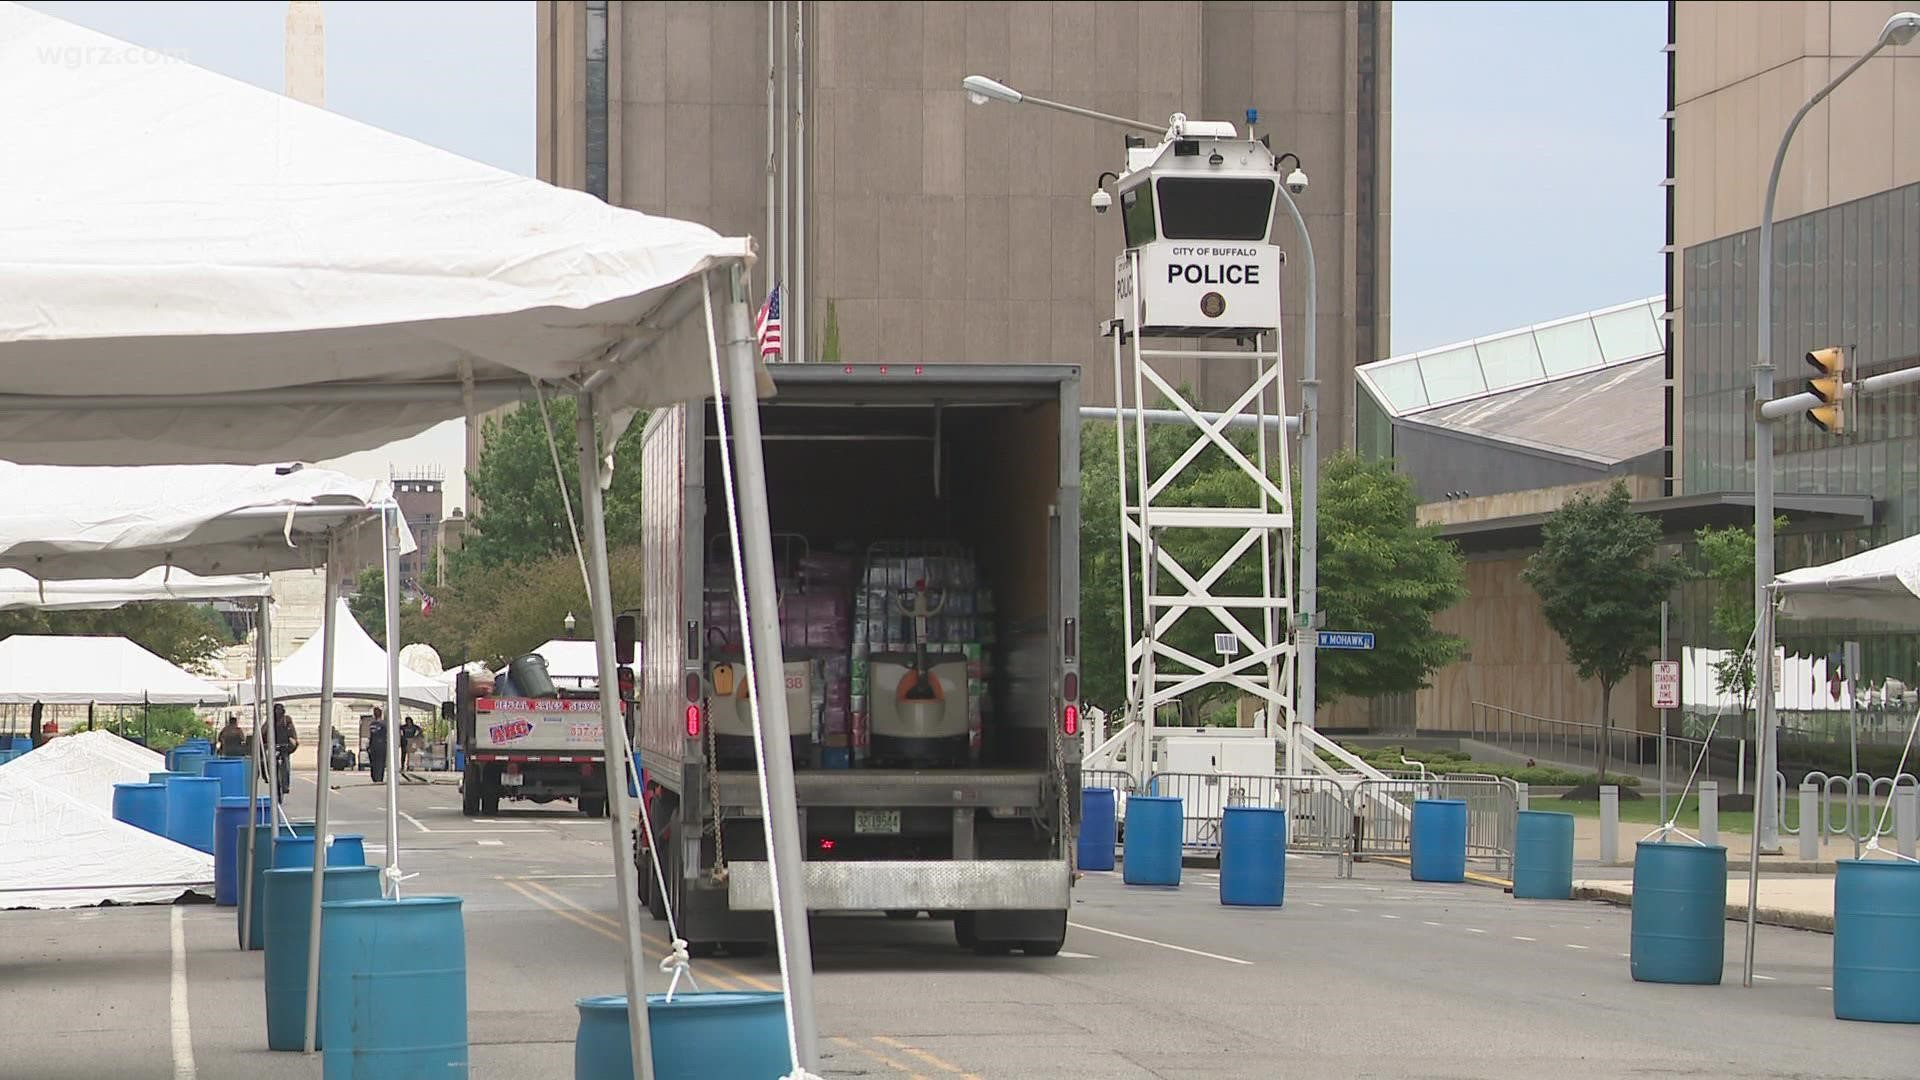 The Taste of Buffalo is making a full in-person come-back. Vendors have spent the day getting ready for the festival weekend.